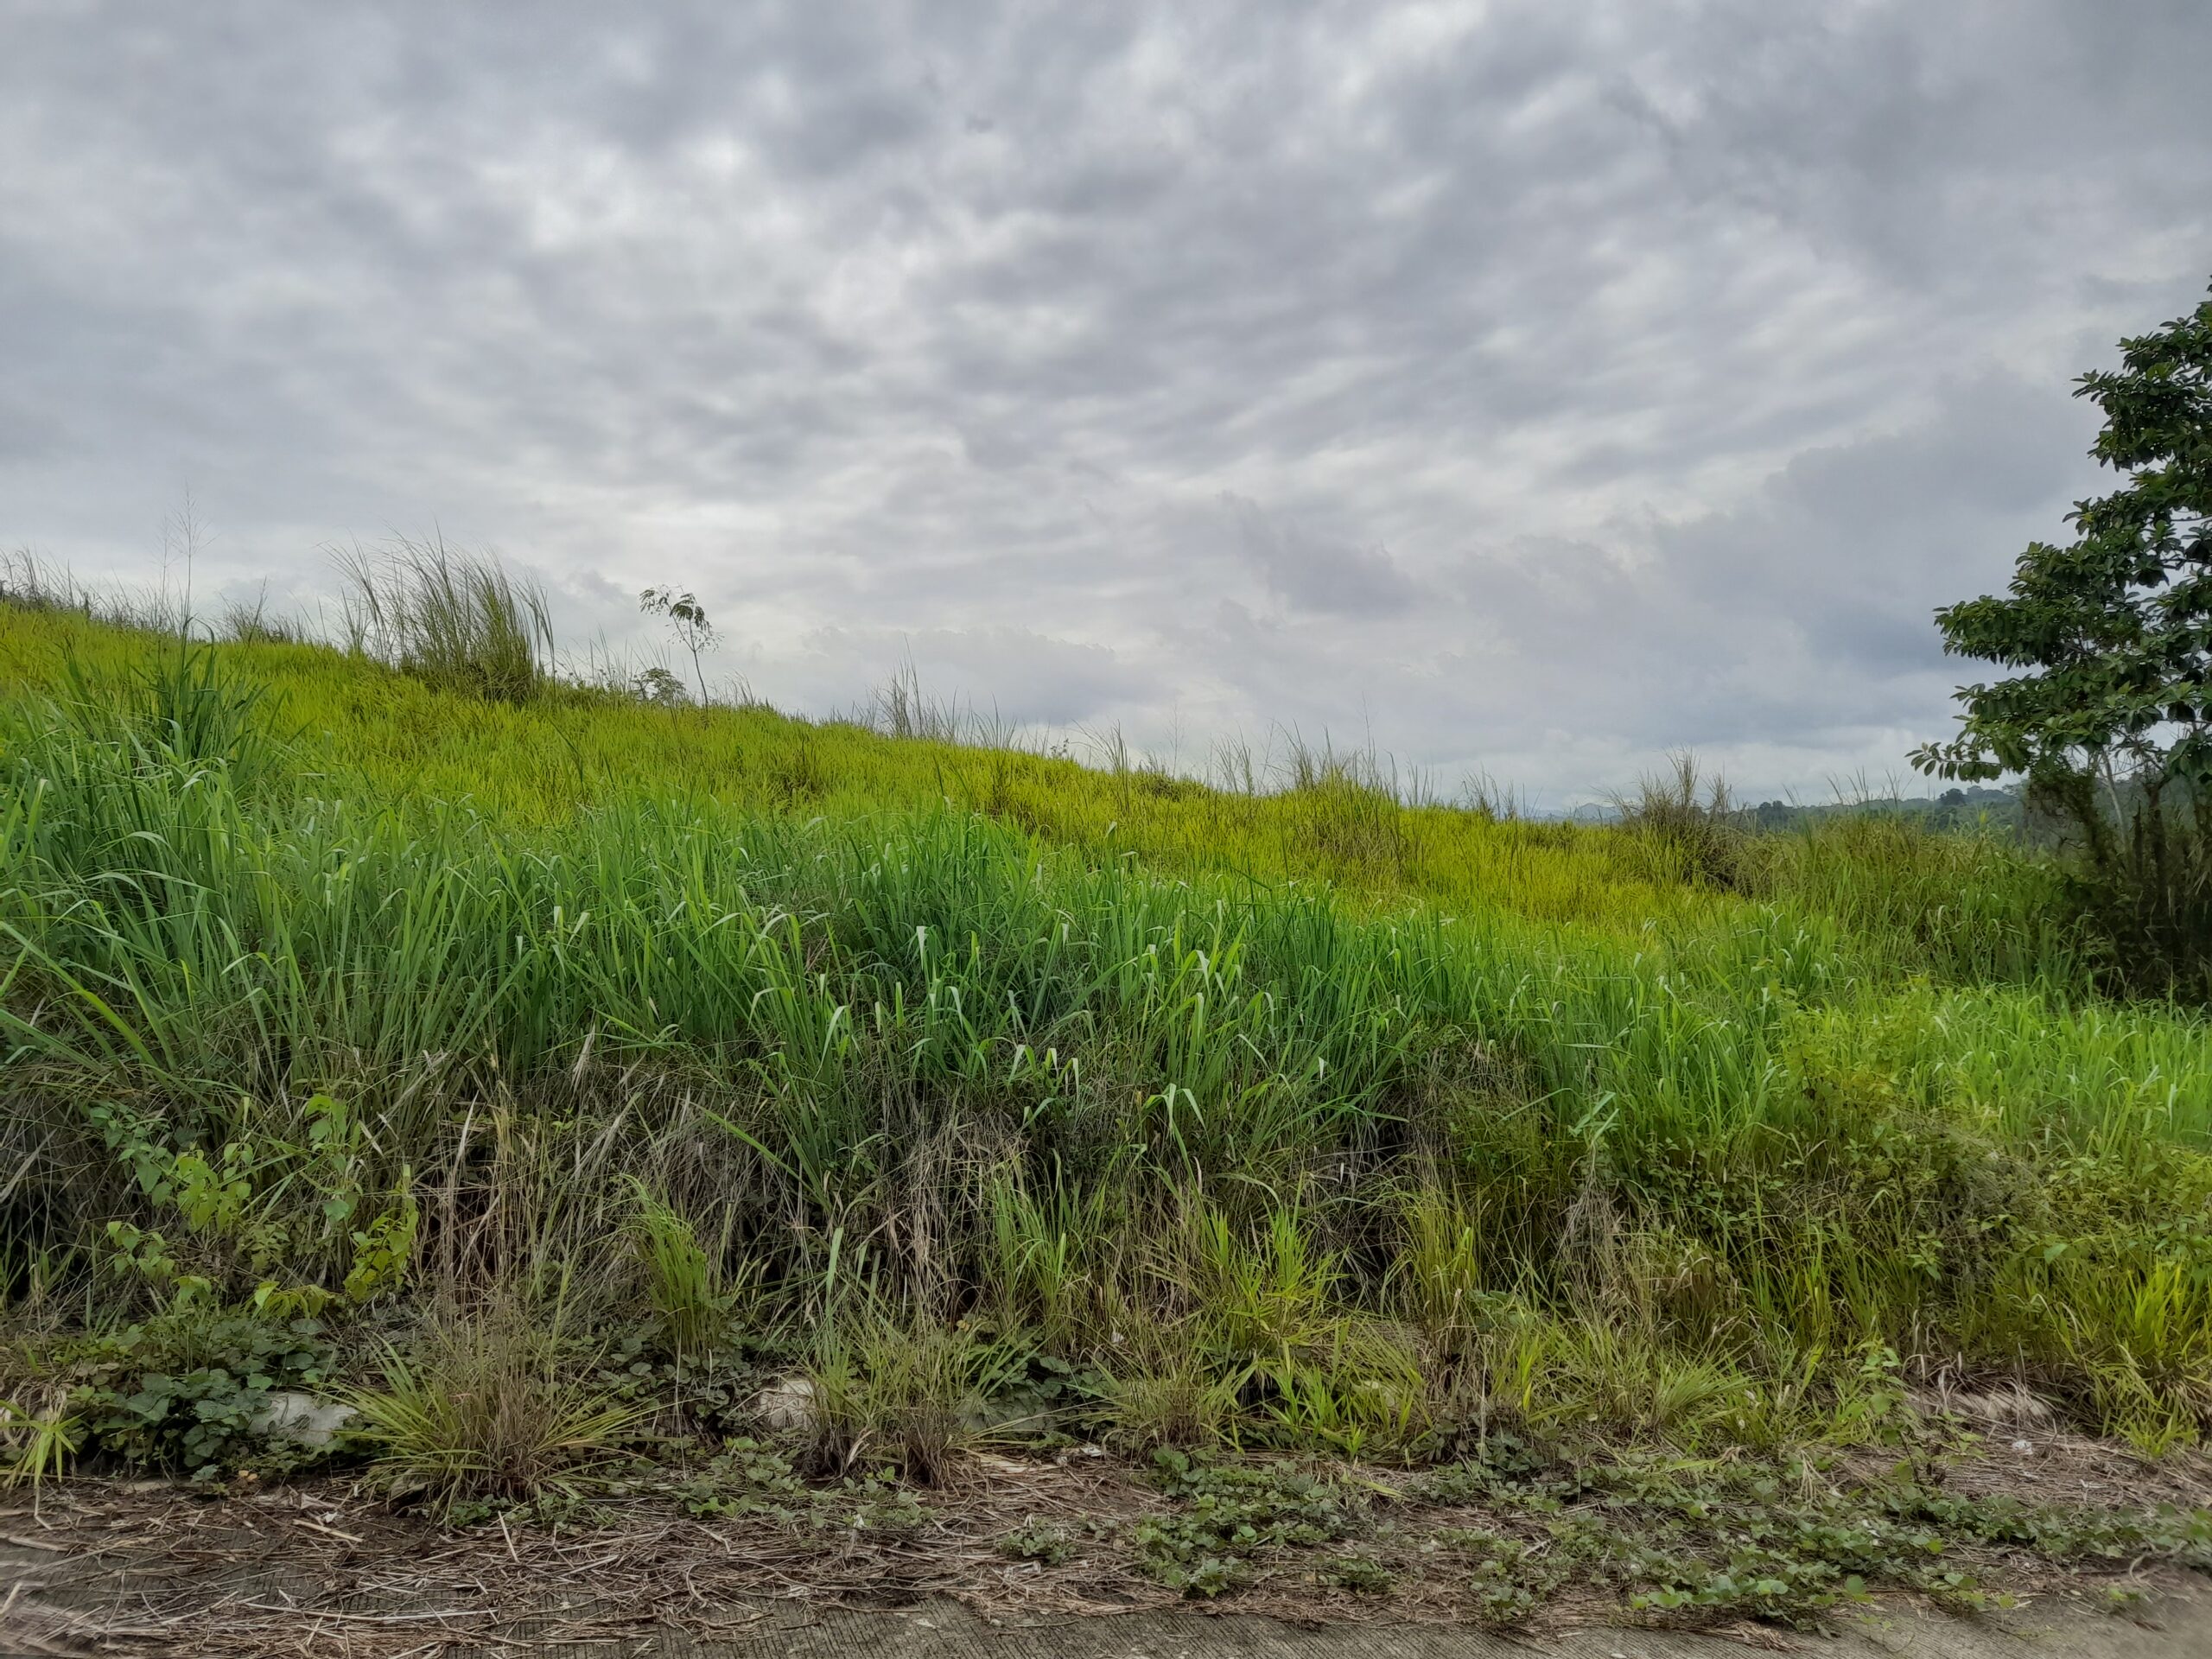 556sqm. Vacant Lot Eastland Heights Subdivision in Antipolo, Rizal